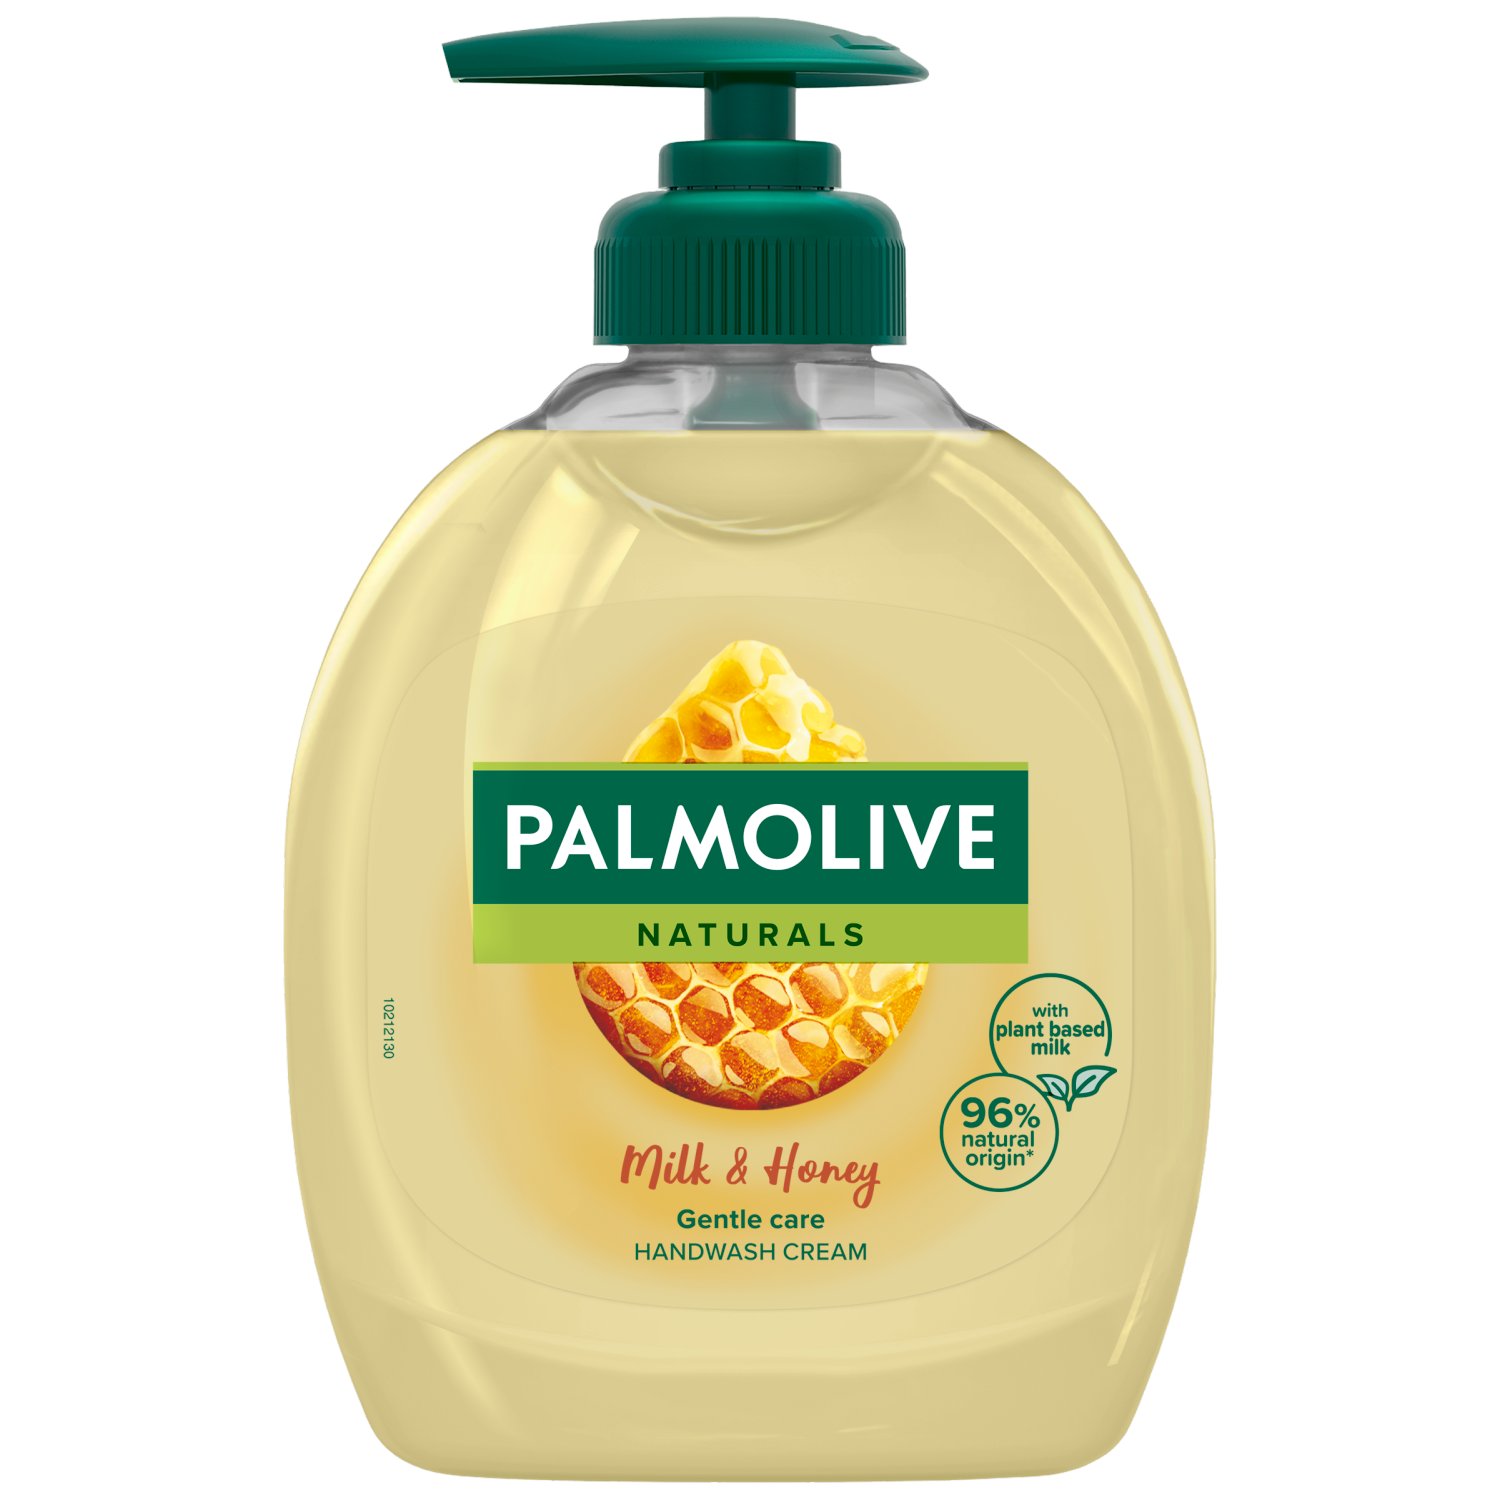 With our Palmolive Naturals Milk & Honey Liquid Hand Soap, you’ll feel reconnected with nature every time you wash your hands. It’s beautifully fragrant and has been thoughtfully created with ingredients of 96% natural origin* and a 95% biodegradable formula. Our handwash, with moisturising milk sourced from nuts, is wonderfully gentle and helps to maintain your skin’s natural moisture.